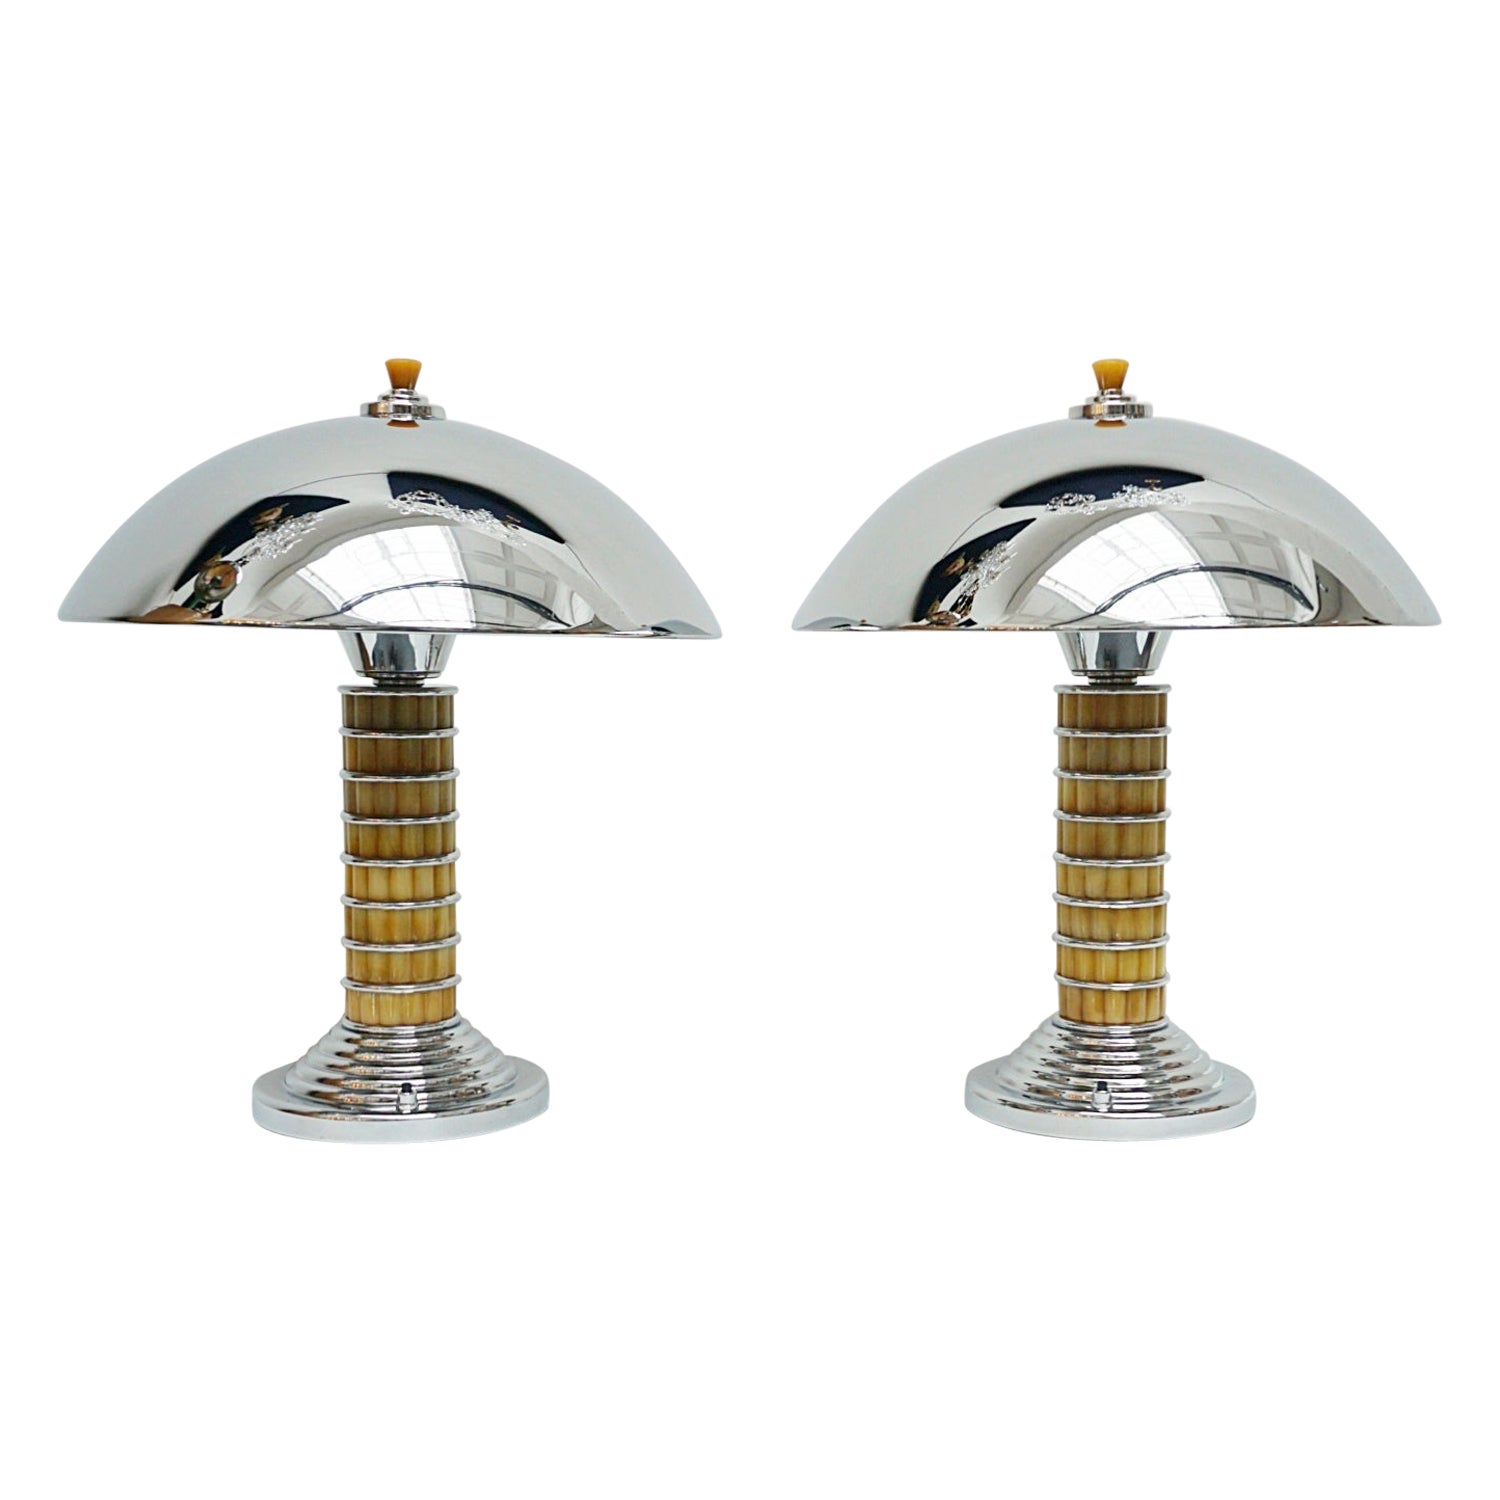 A Pair of Art Deco Bakelite and Chrome Table Lamps 